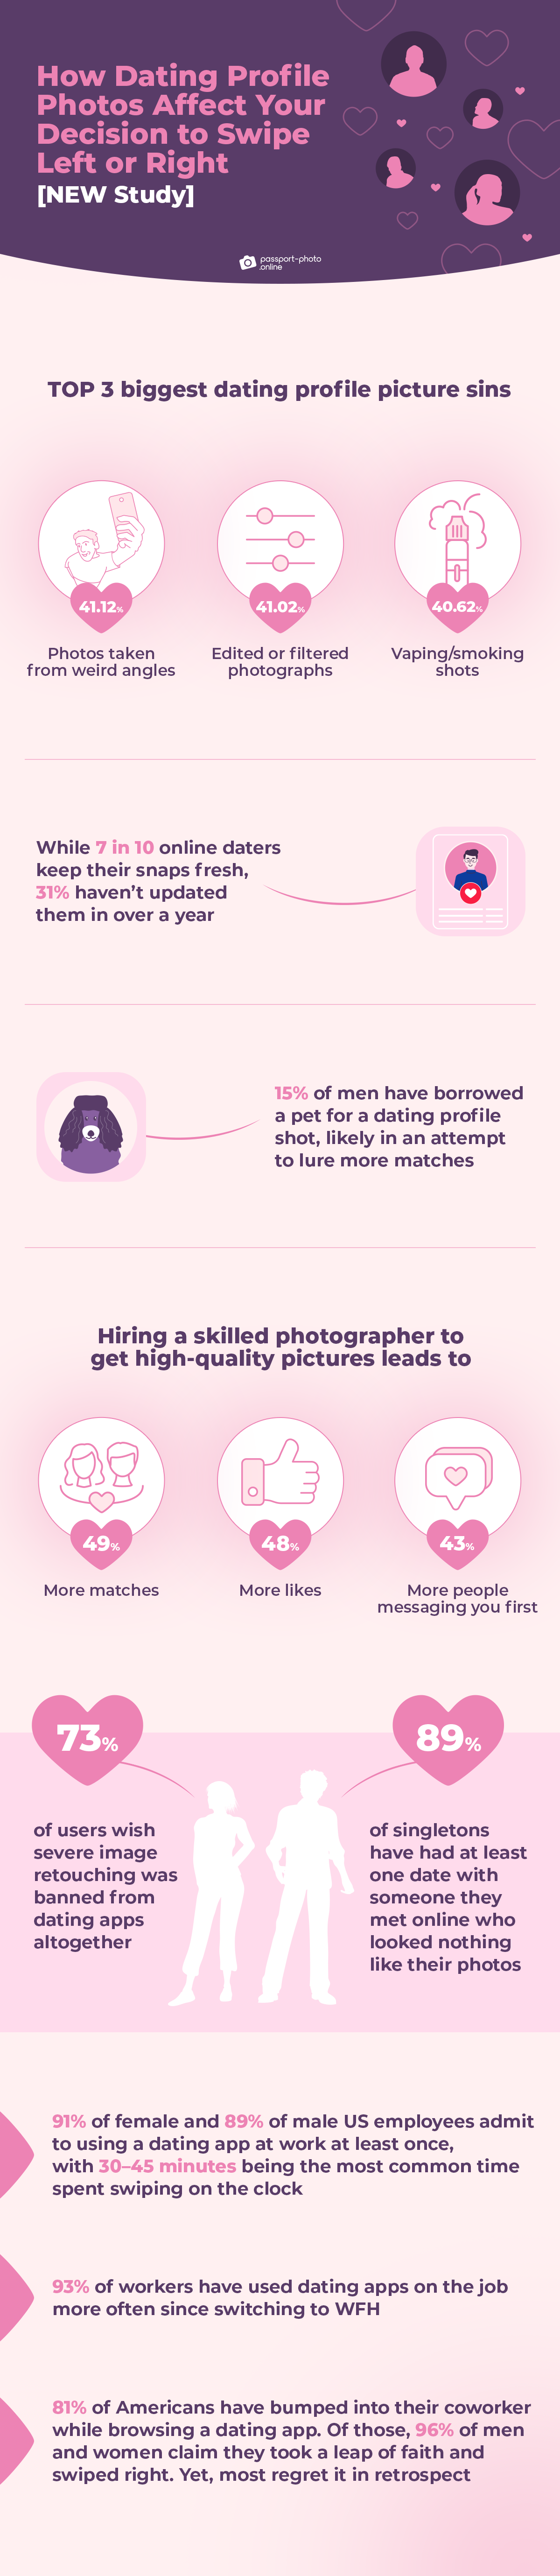 dating profile photos: study’s key findings